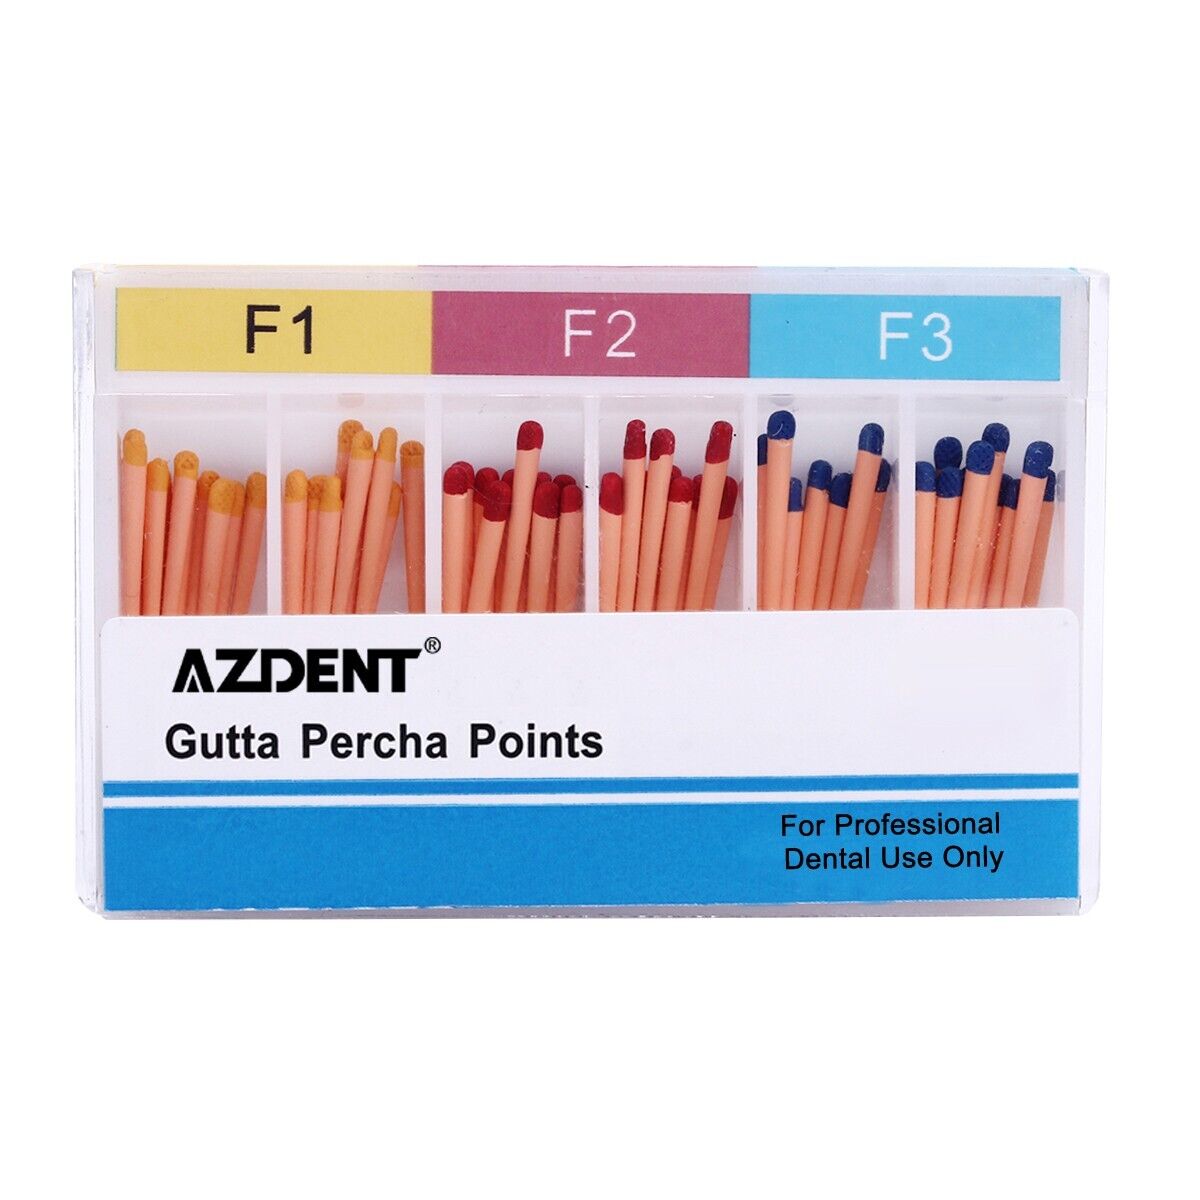 60Pcs/Pack Dental Endo Root Canal Gutta Percha Points Tips F1-F3 AZDENT